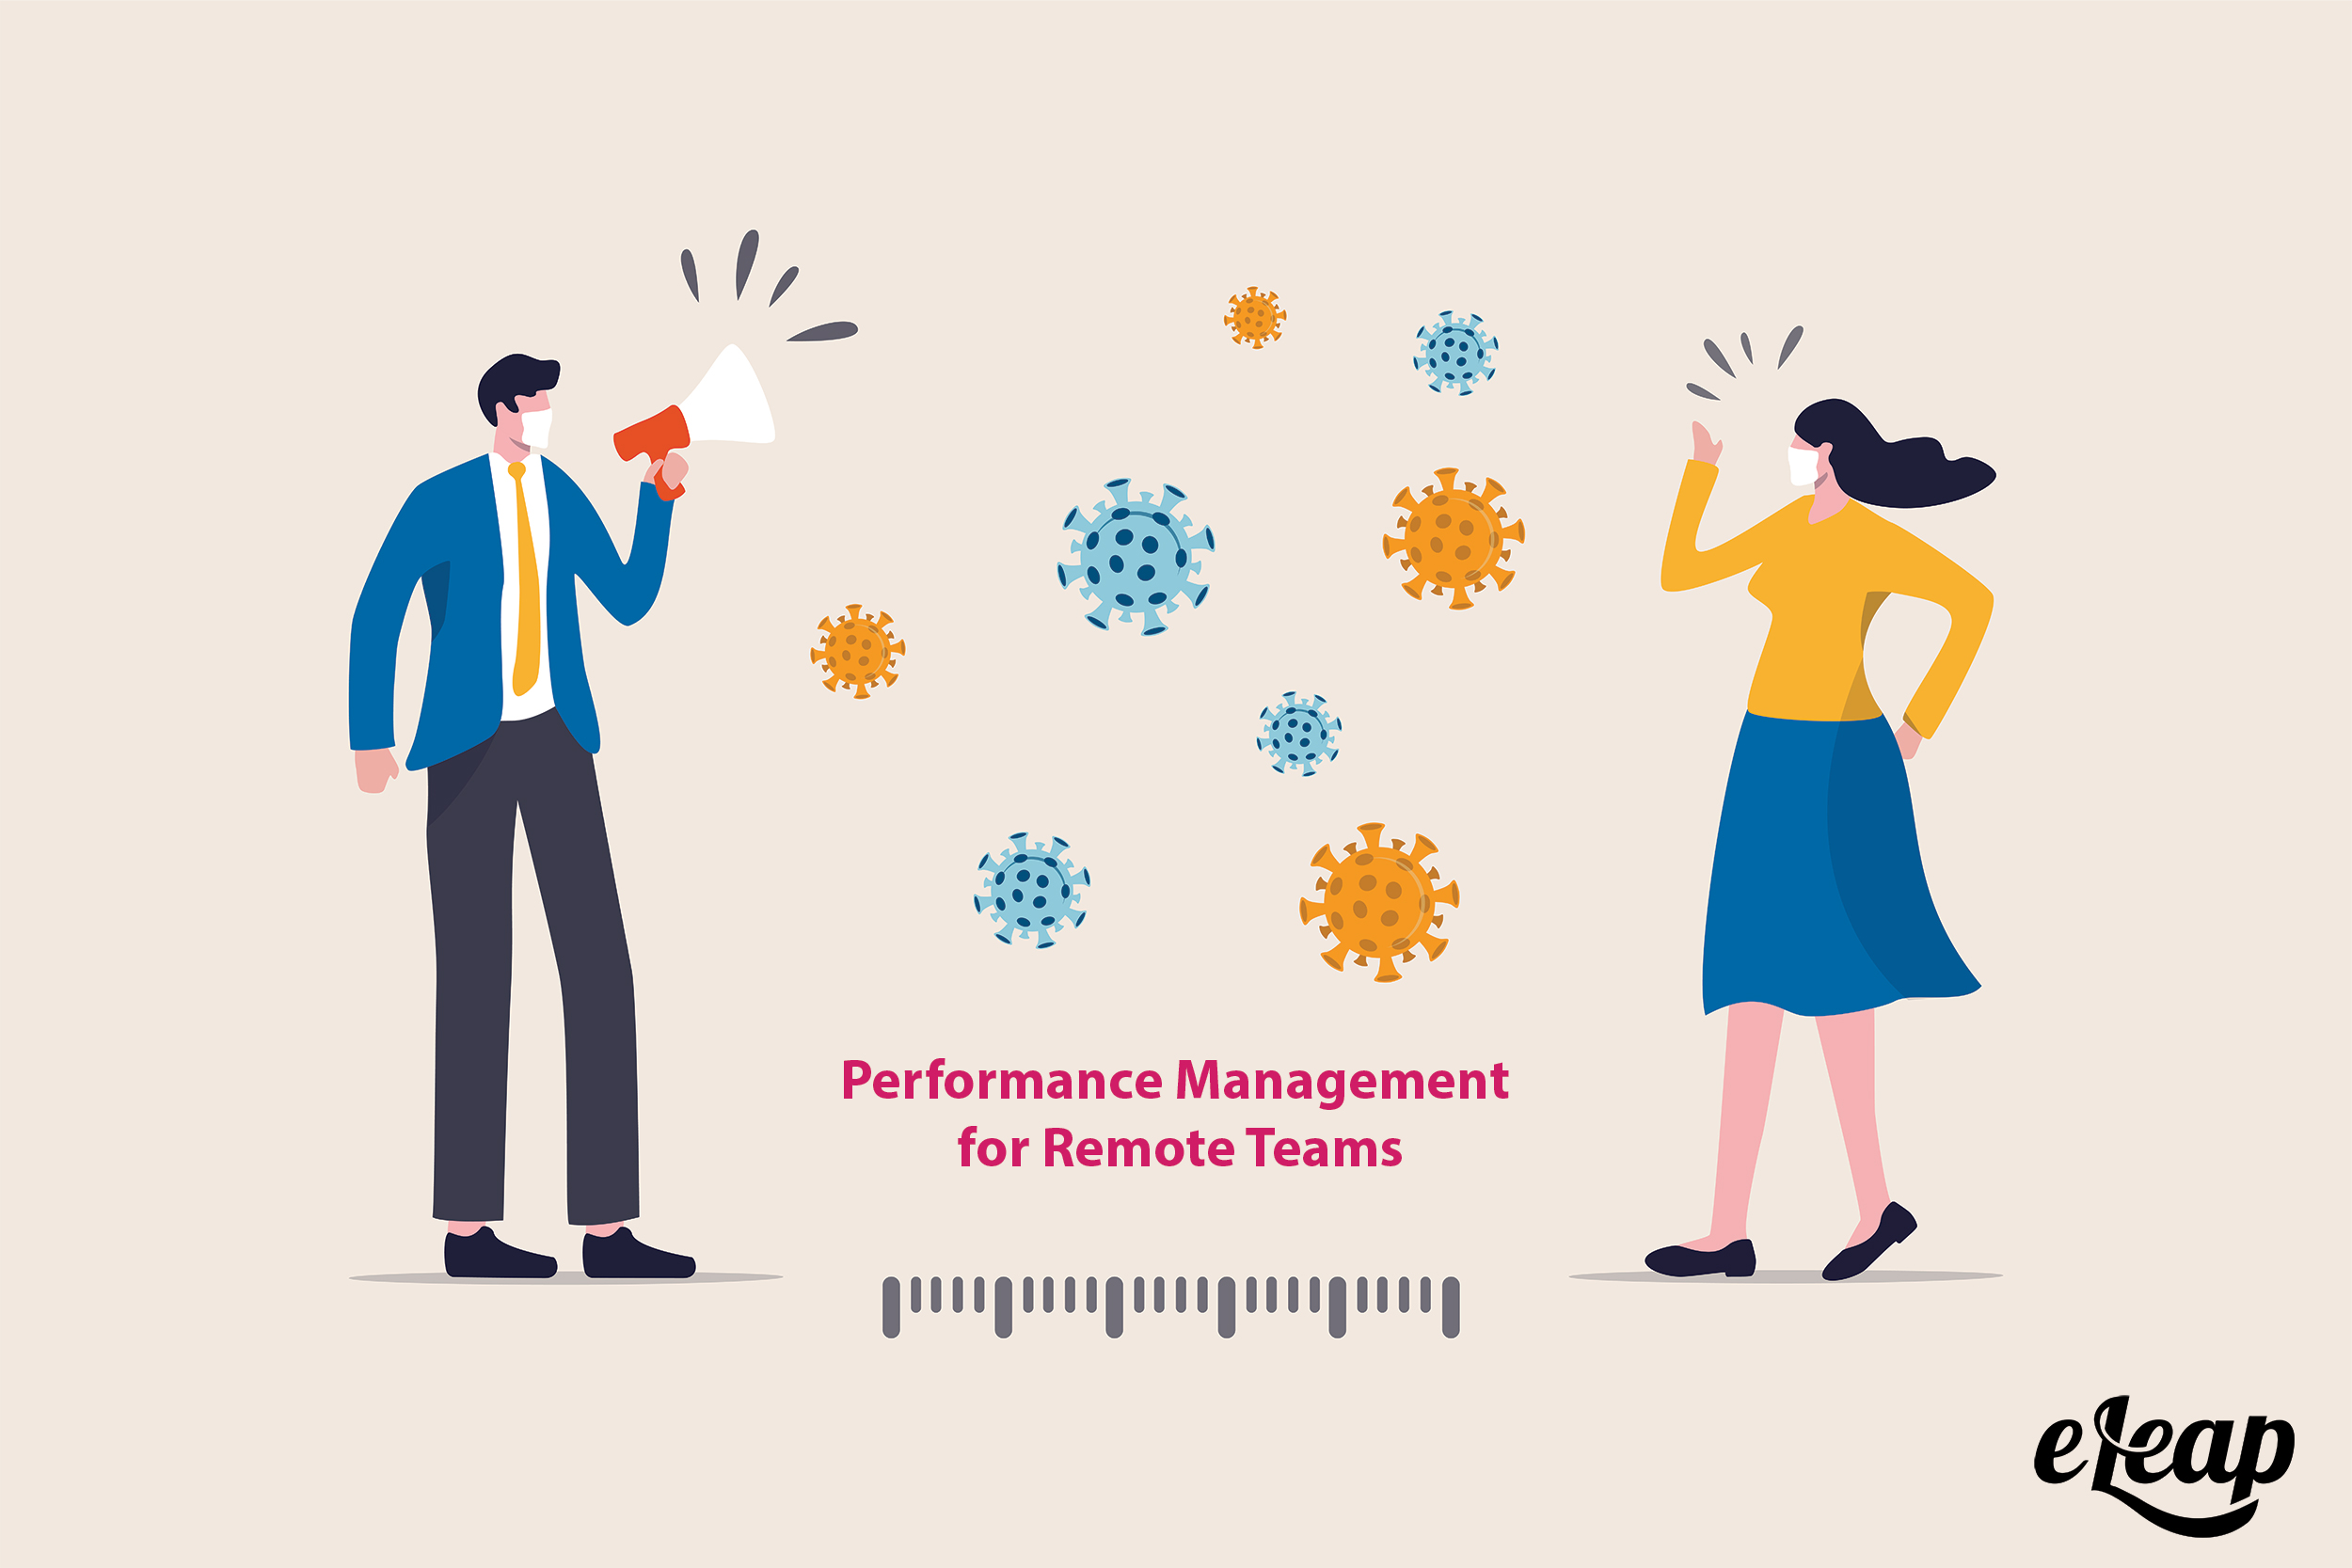 Performance management in social distance world - remote teams